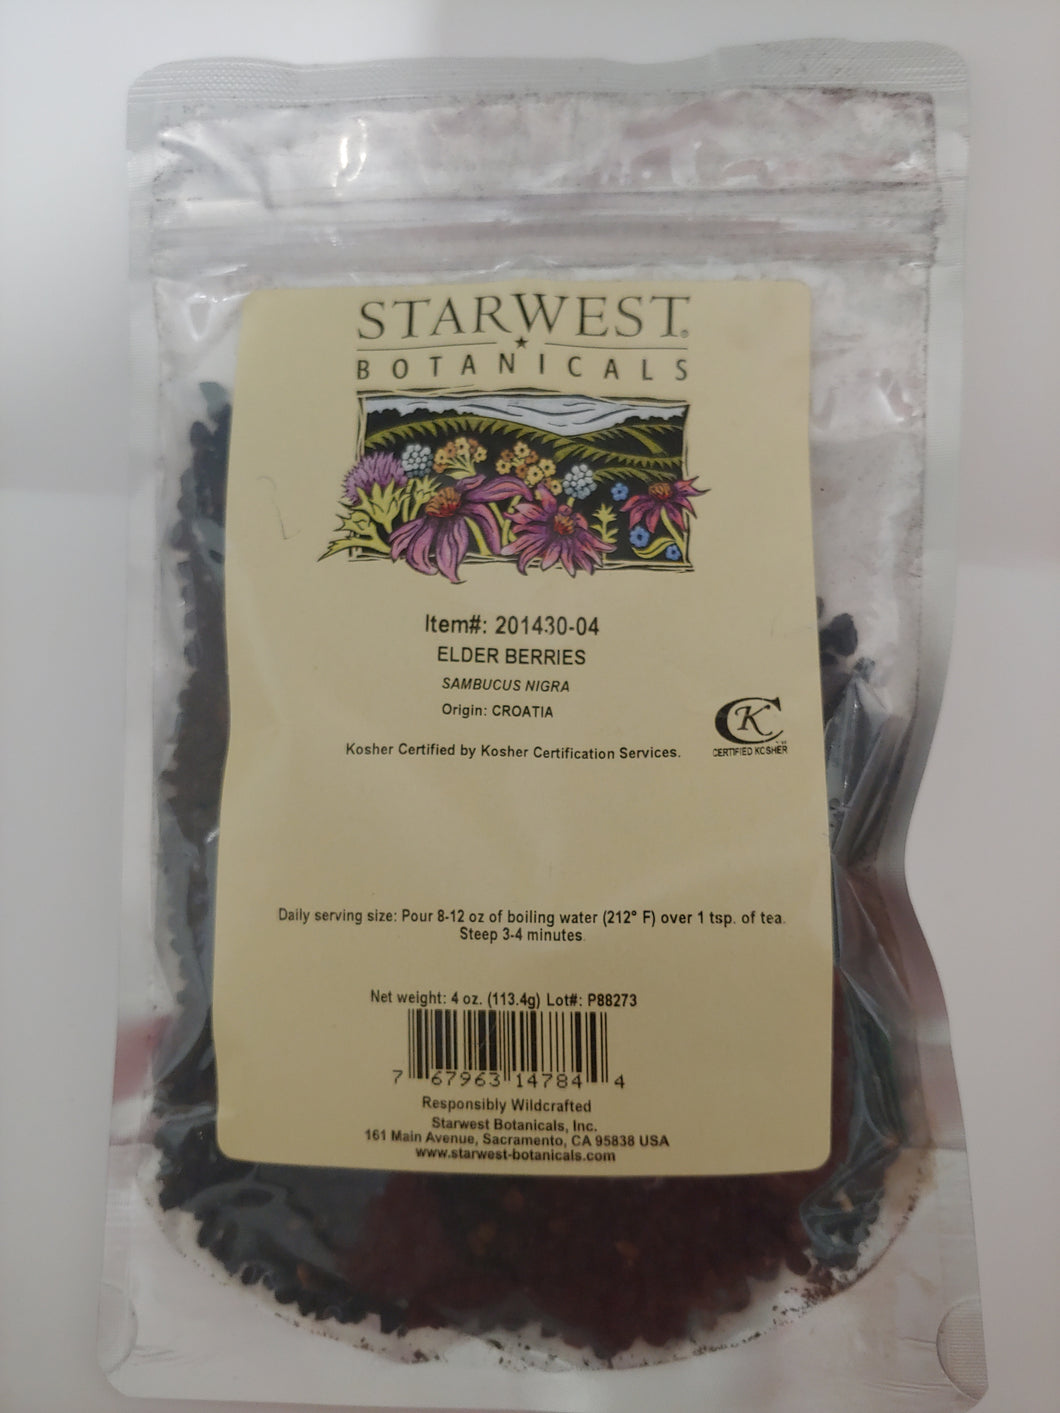 Starwest Botanicals Elderberries Whole Wildcrafted 4 ounce